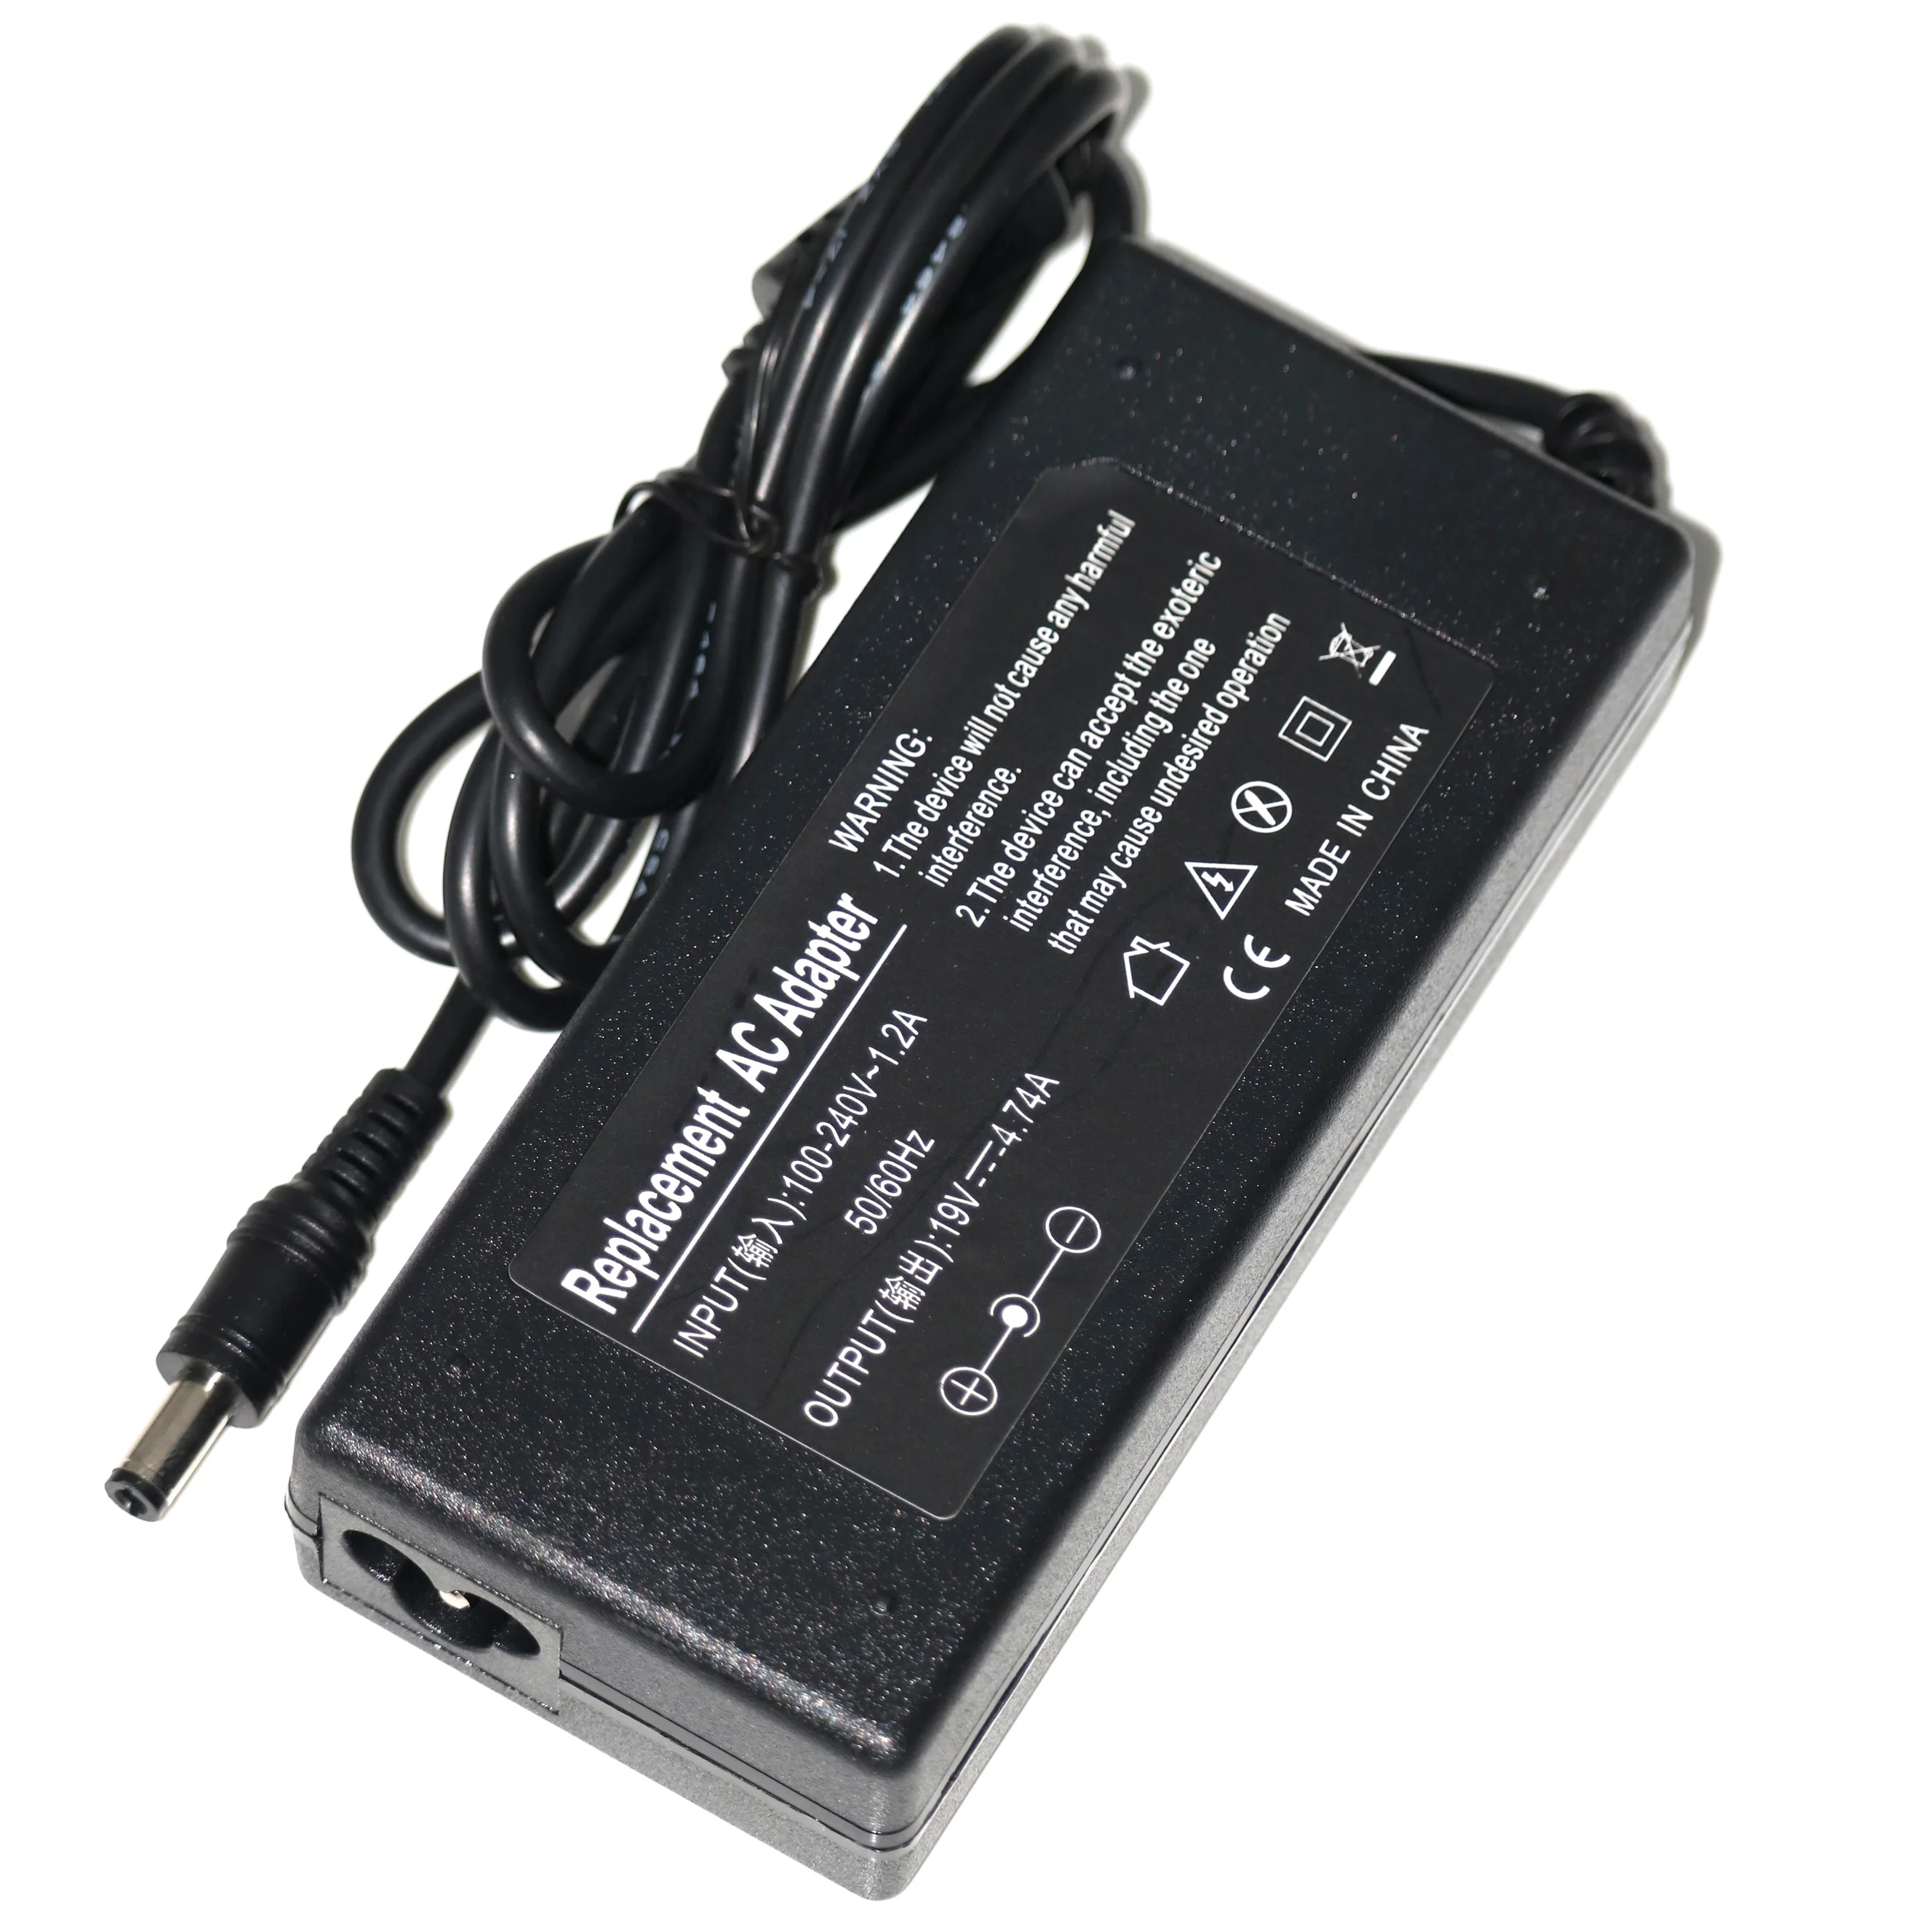 

19V 4.74A 5.5*2.5mm 90W For ASUS AC Adapter Power Supply Laptop Charger ADP-90AB ADP-90CD DB A46C M50 X43B S5 W7 F25